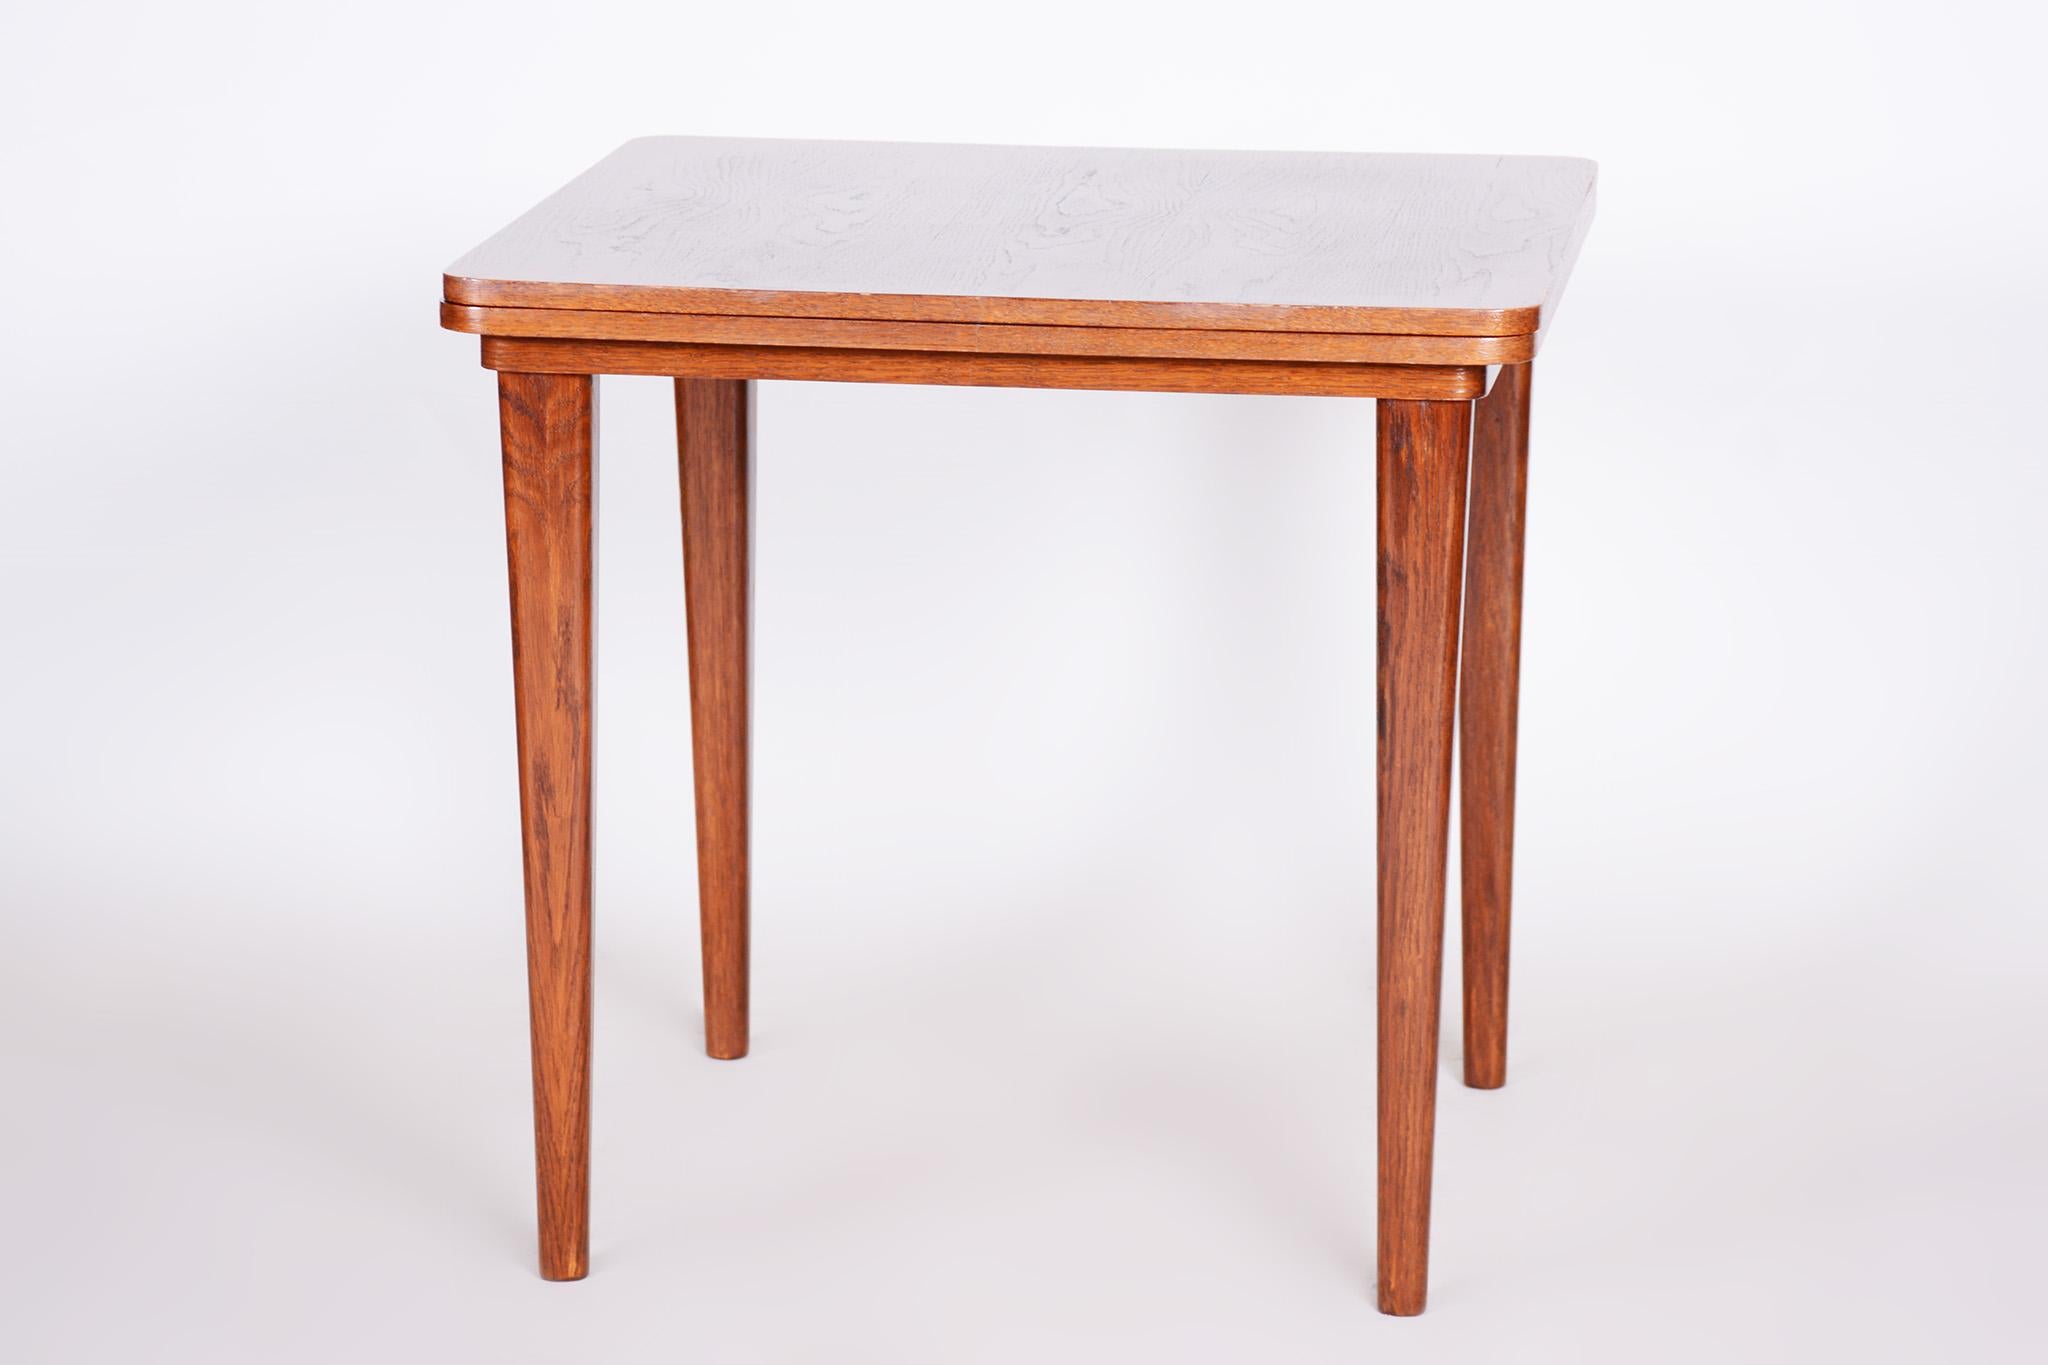 Small folding table.
Czech midcentury
Material: Oak
Period: 1940-1949
Condition: restored.
Made by Up Závody 
Designed by Jindrich Halabala.